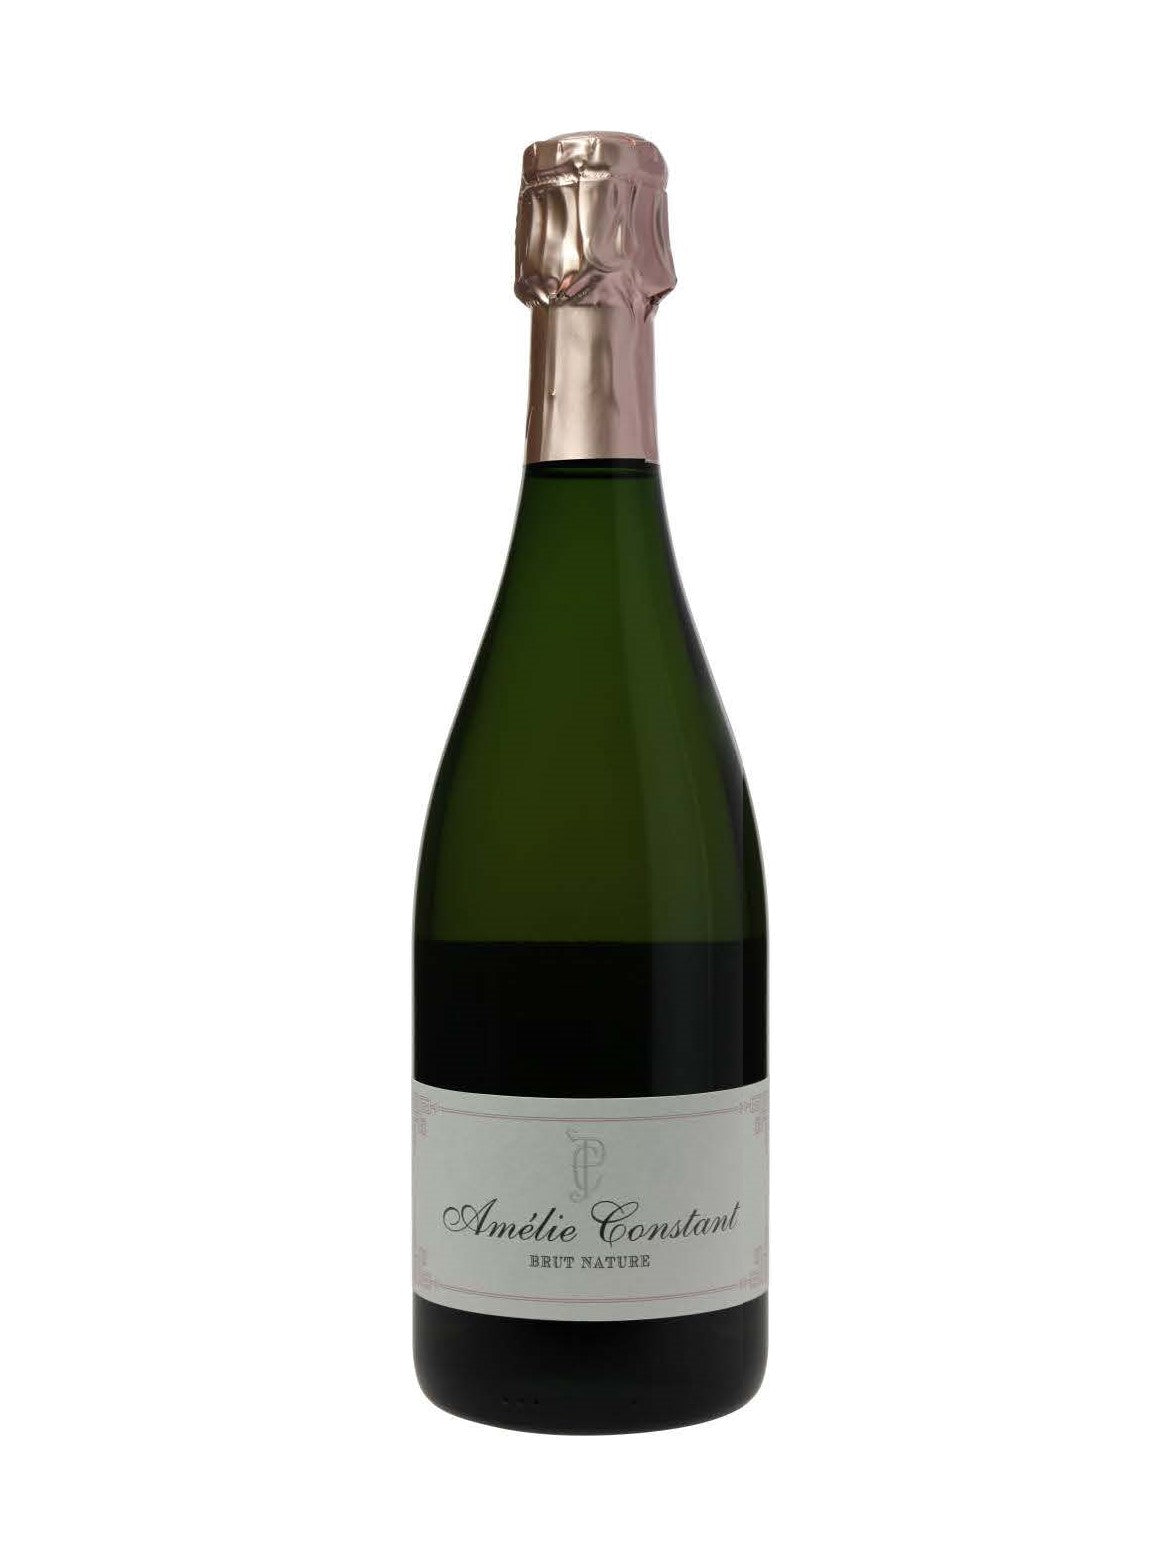 Amelie Constant Cremant Brut Rose - TEMPORARILY OUT OF STOCK